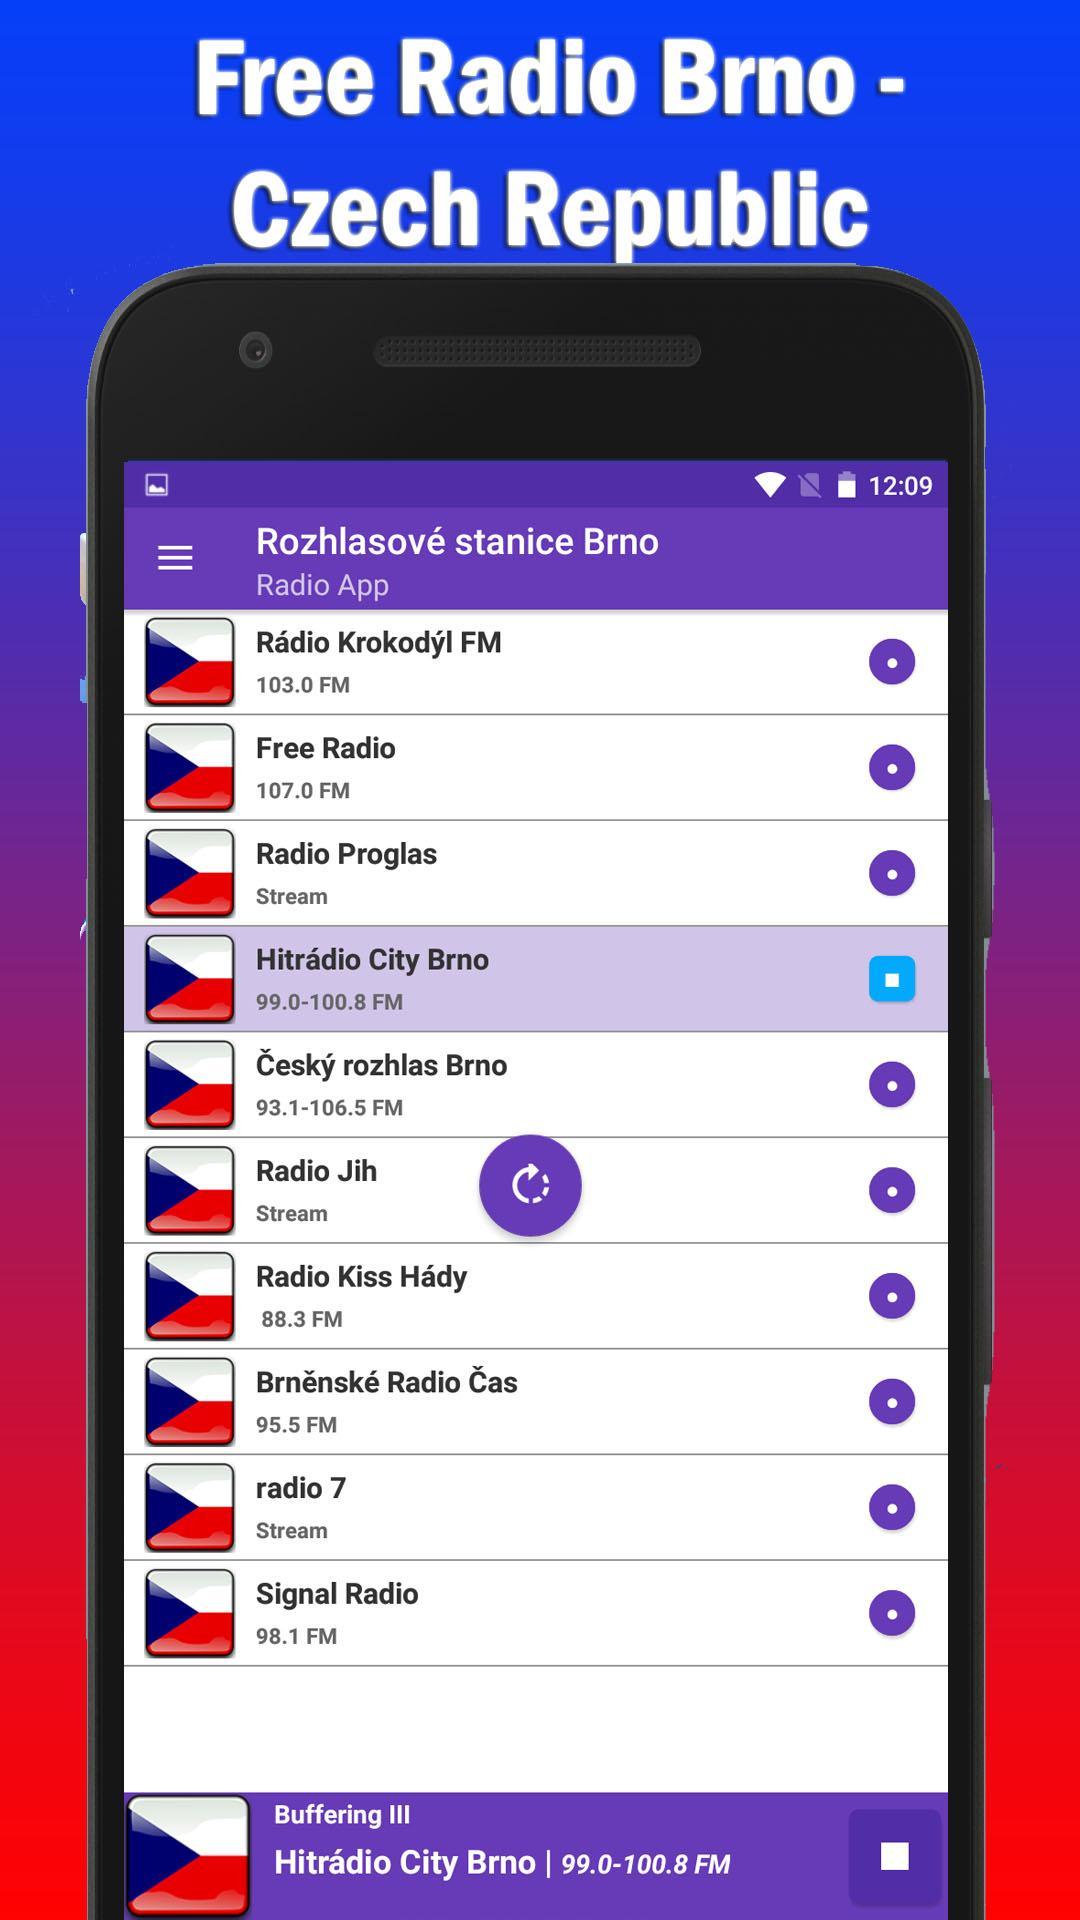 Free Radio Brno - Czech Republic 📻: Live for Android - APK Download